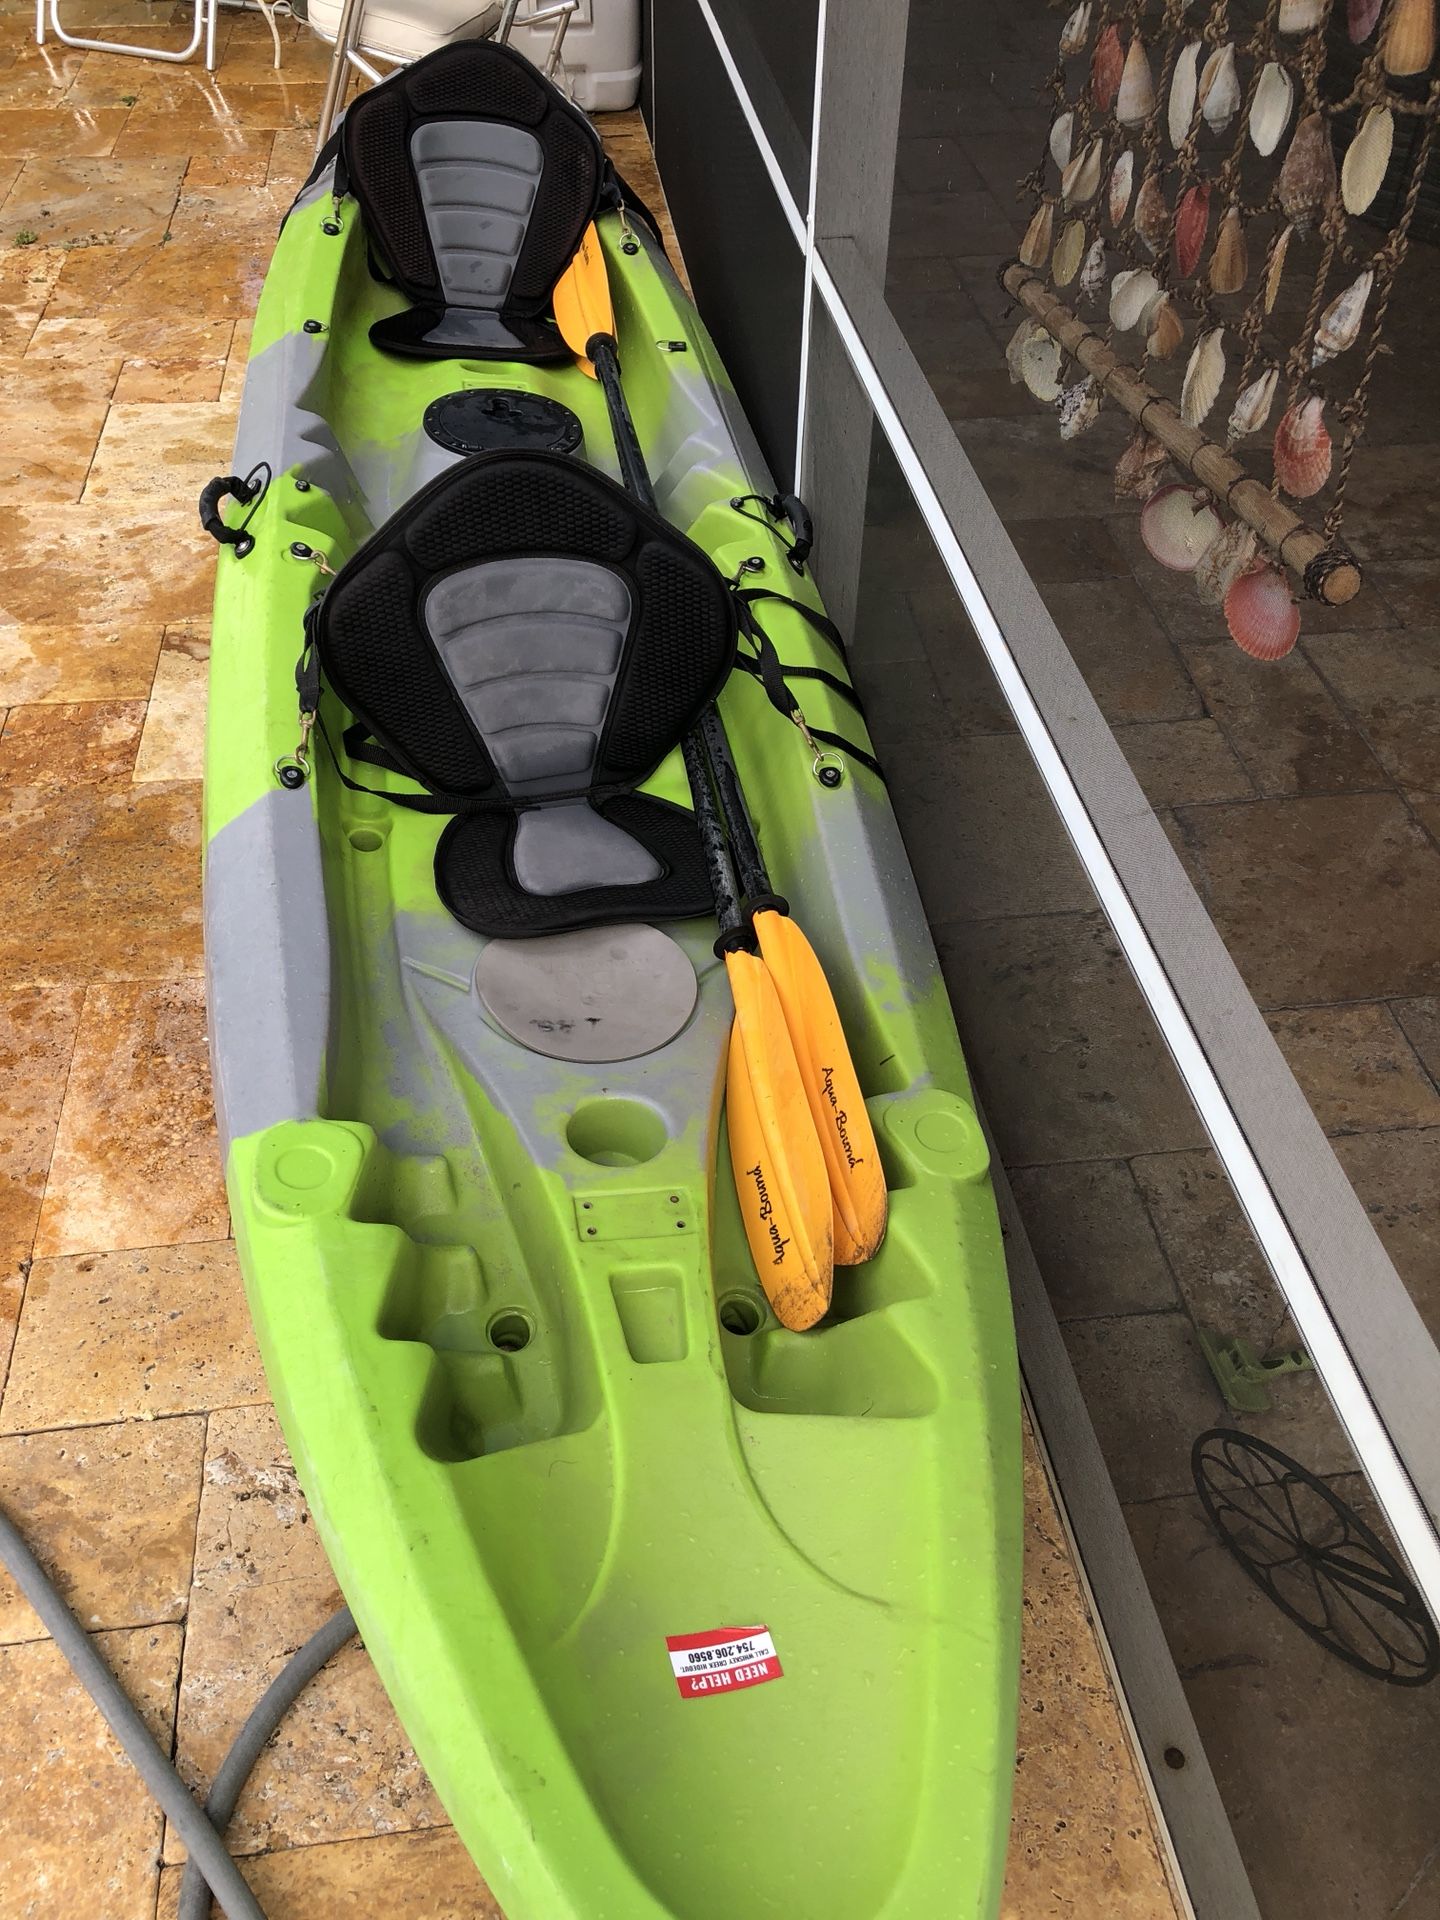 Tandem kayak 14 feet the brand is white knuckle